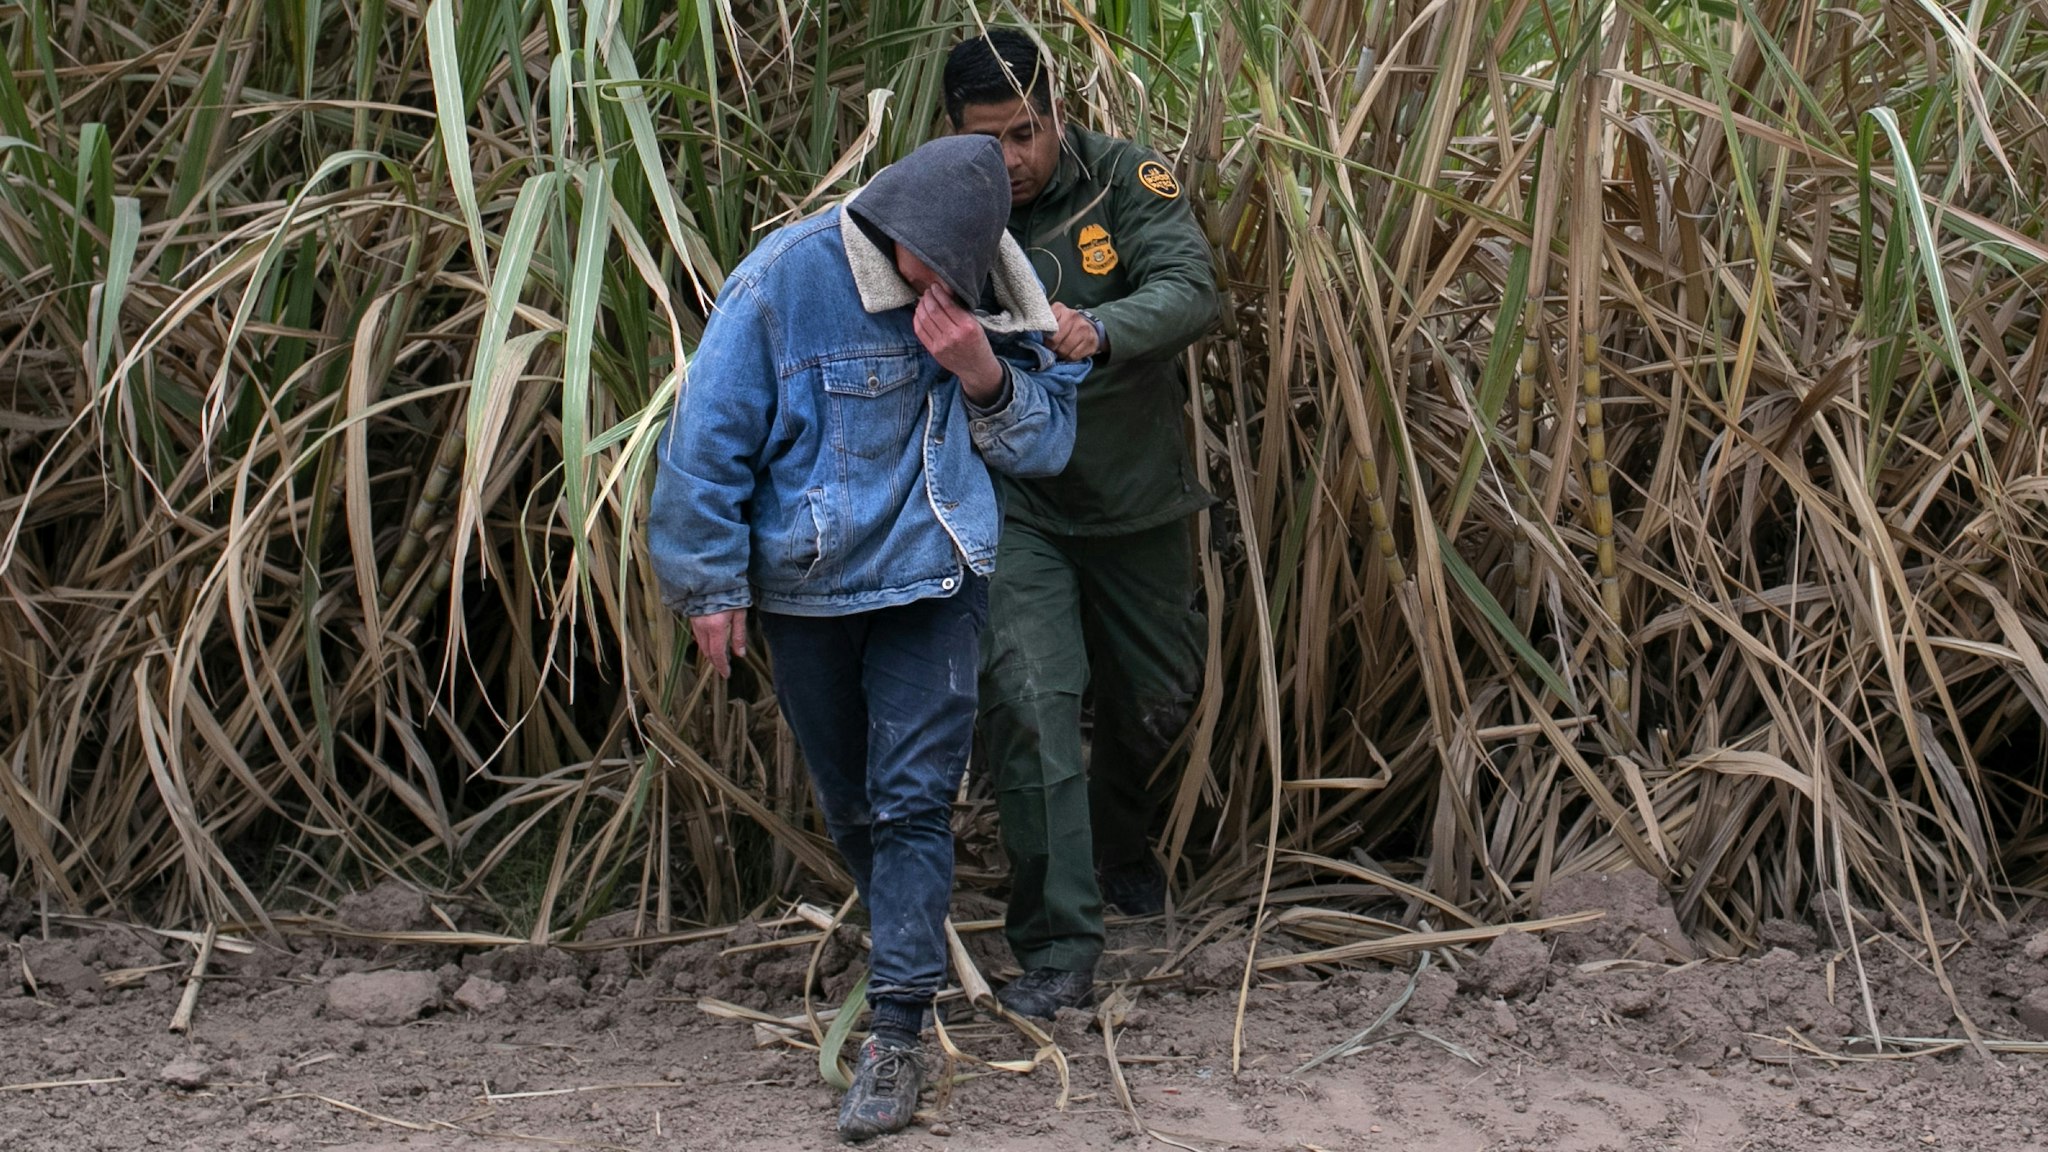 MISSION, TEXAS - DECEMBER 11: A U.S. Border Patrol agent detains undocumented immigrants caught in a sugar cane field near a section of privately-built border wall under construction on December 11, 2019 near Mission, Texas. The hardline immigration group We Build The Wall is funding construction of the wall on private land along the Rio Grande, which forms the border with Mexico. The group, led by former Trump strategist Stephen Bannon claims to have raised tens of millions of dollars in a GoFundMe drive to build sections of wall along stretches of the southwest border with Mexico.